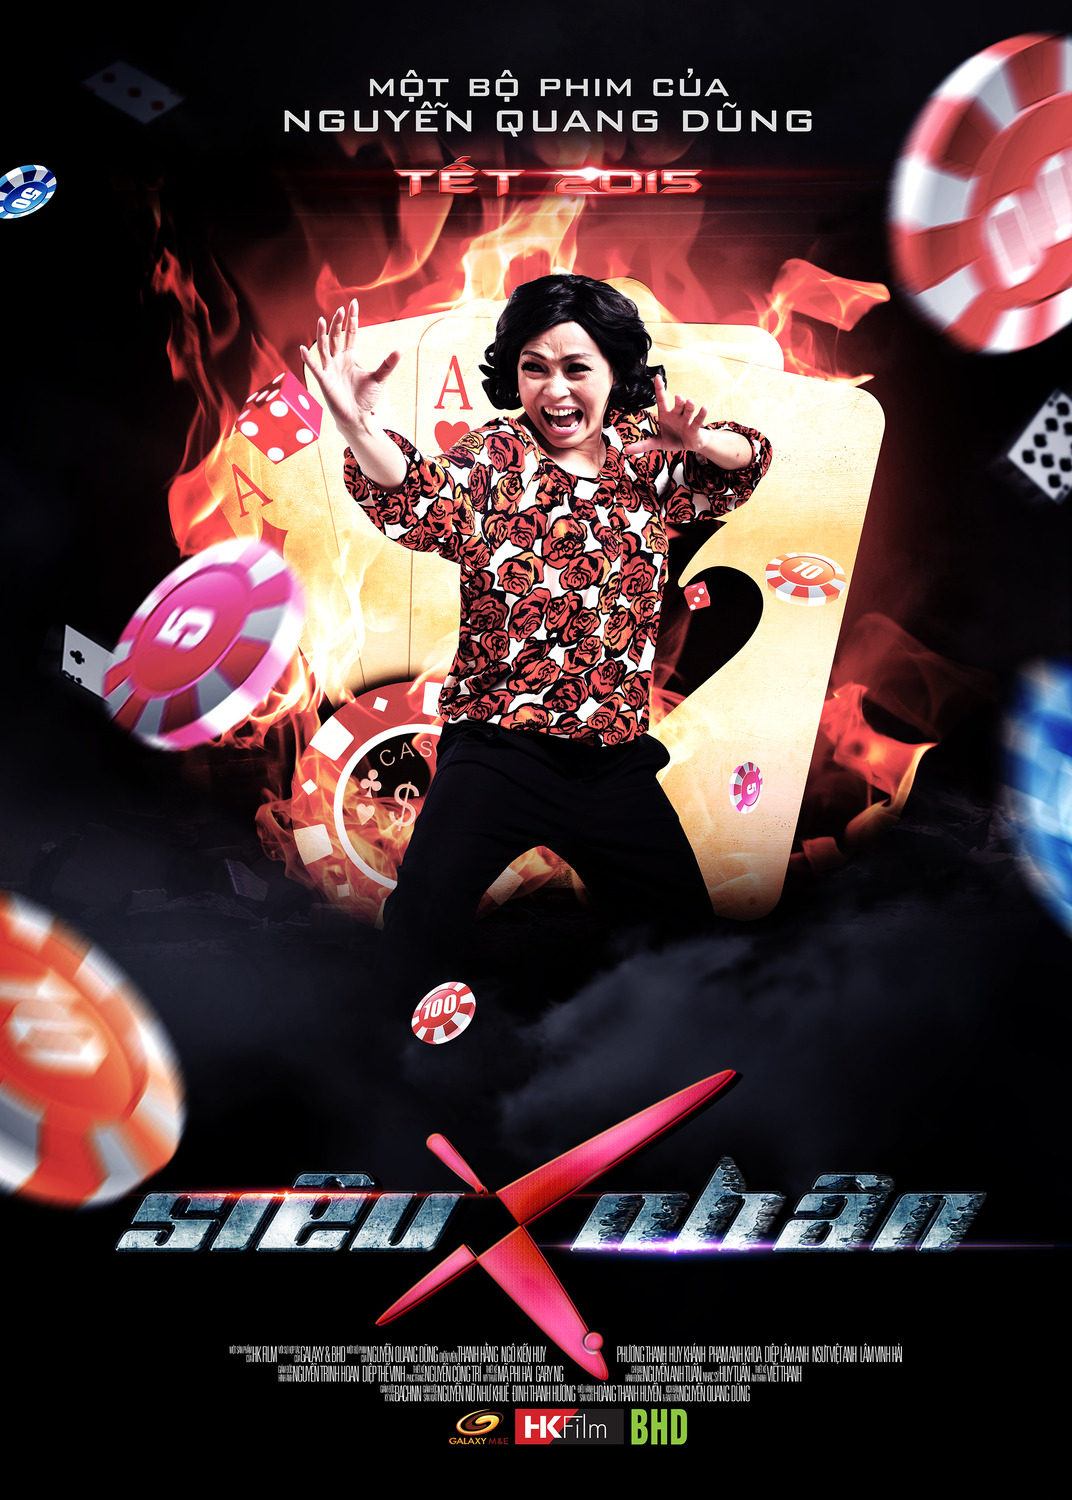 Extra Large Movie Poster Image for Sieu Nhan X: Super X (#7 of 8)